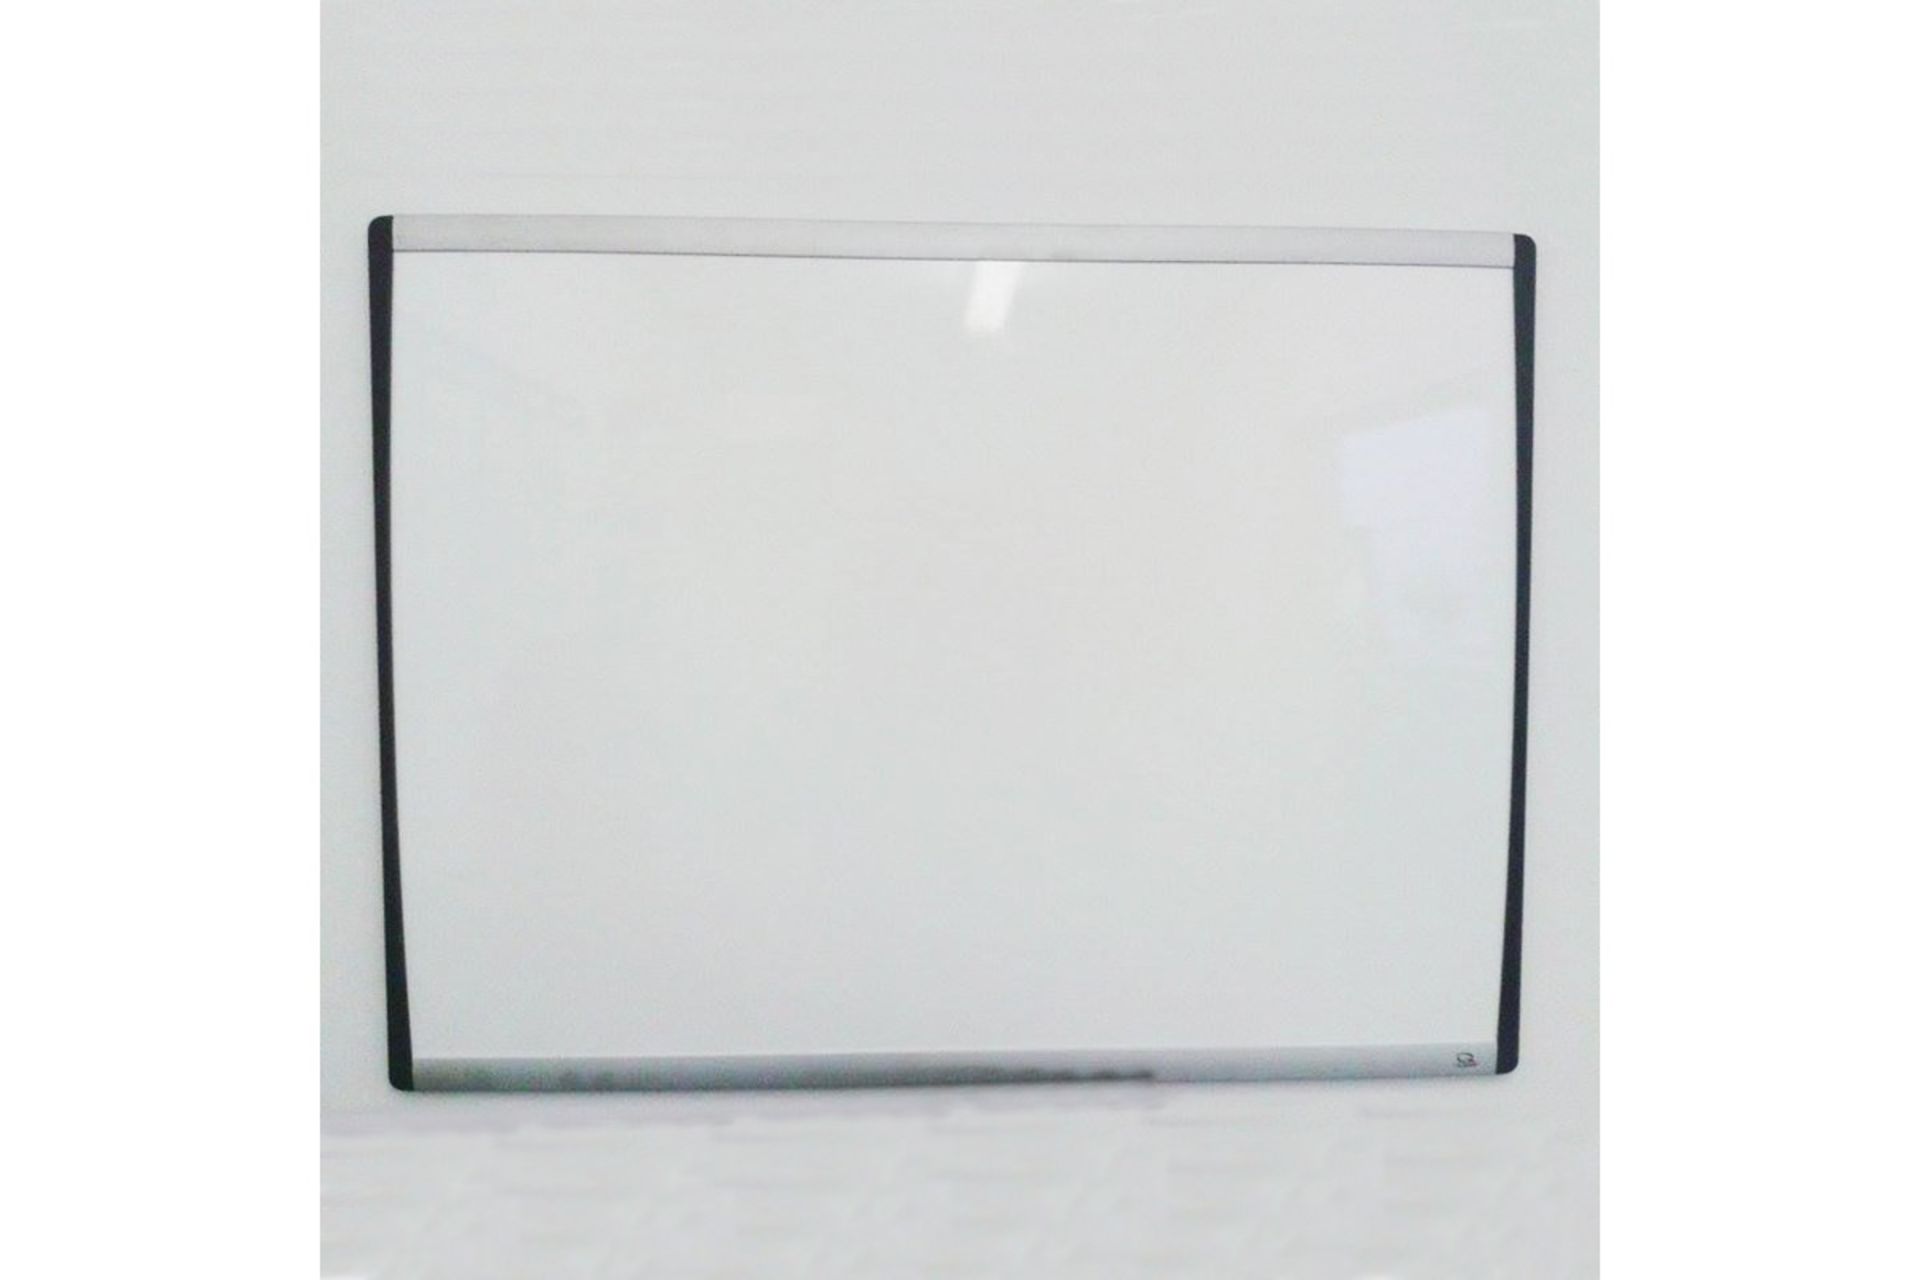 V Brand New Magnetic Whiteboard (size: 30CM x 24CM) Frame made from high quality aluminium